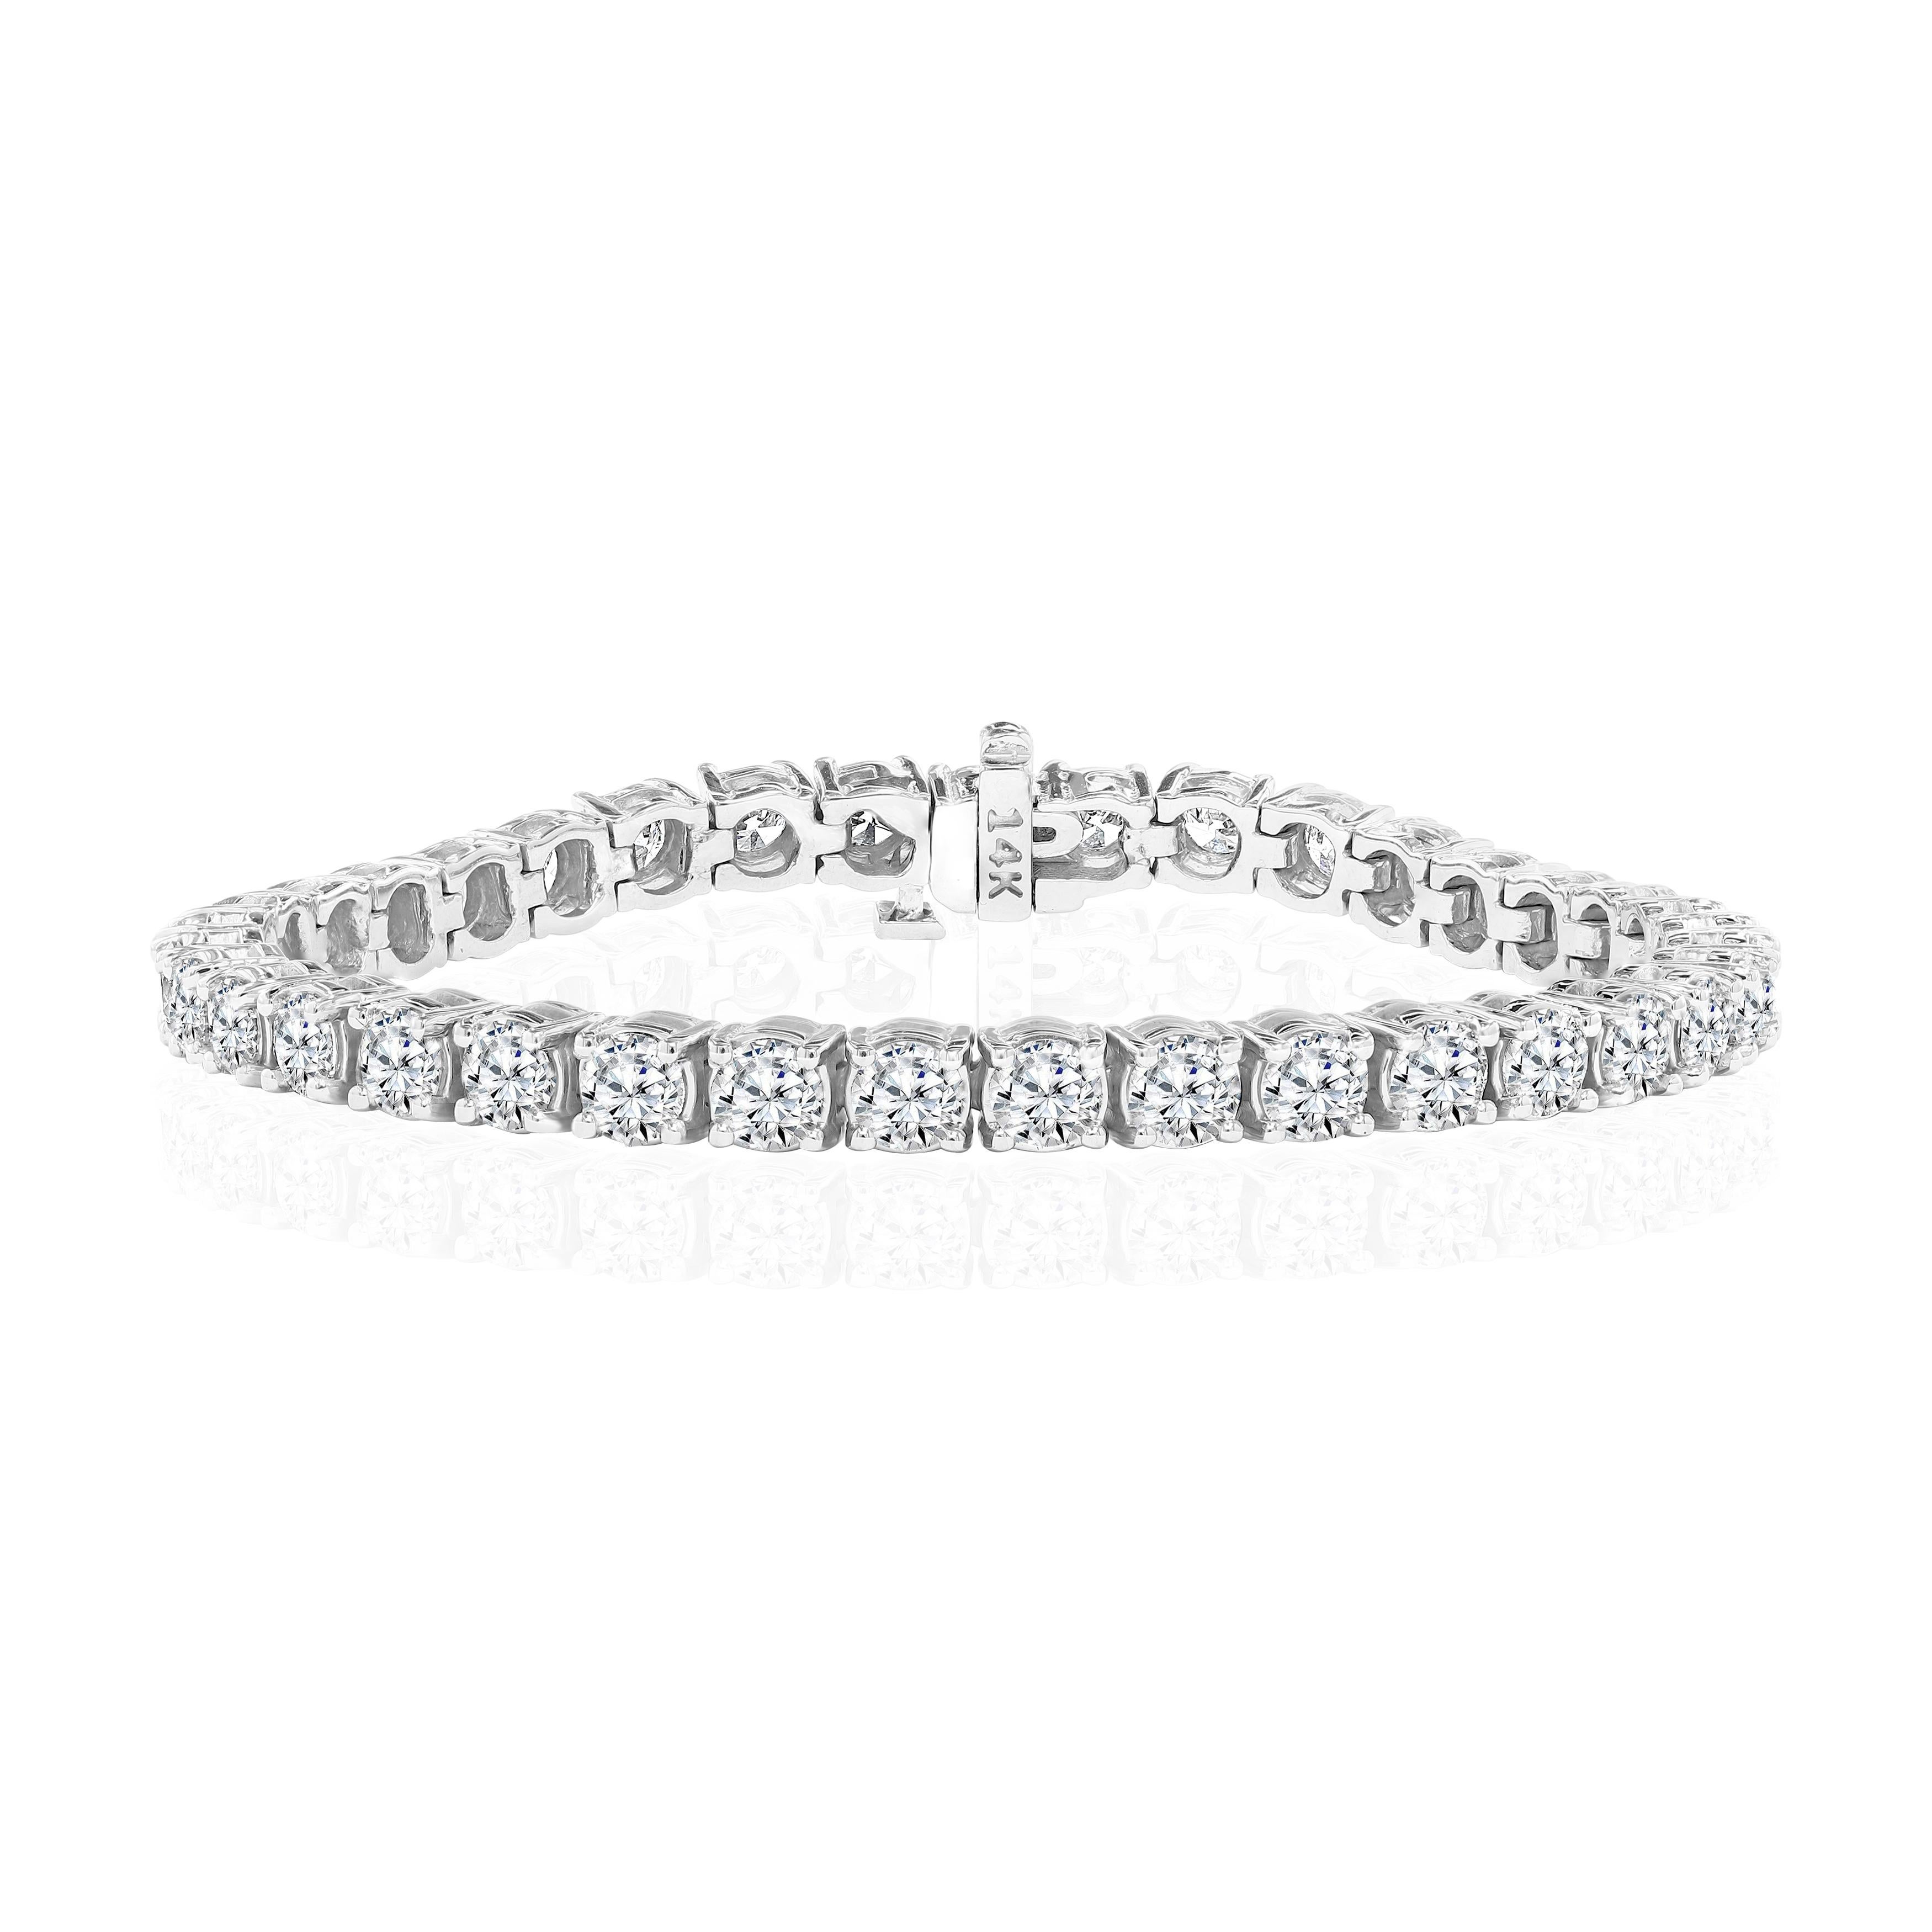 36 Round Brilliant Diamonds weighing 11.35 Carats and set in 14 Karat White Gold.

Diamonds are of H-I color and SI clarity.

Measures 6.75 inches.